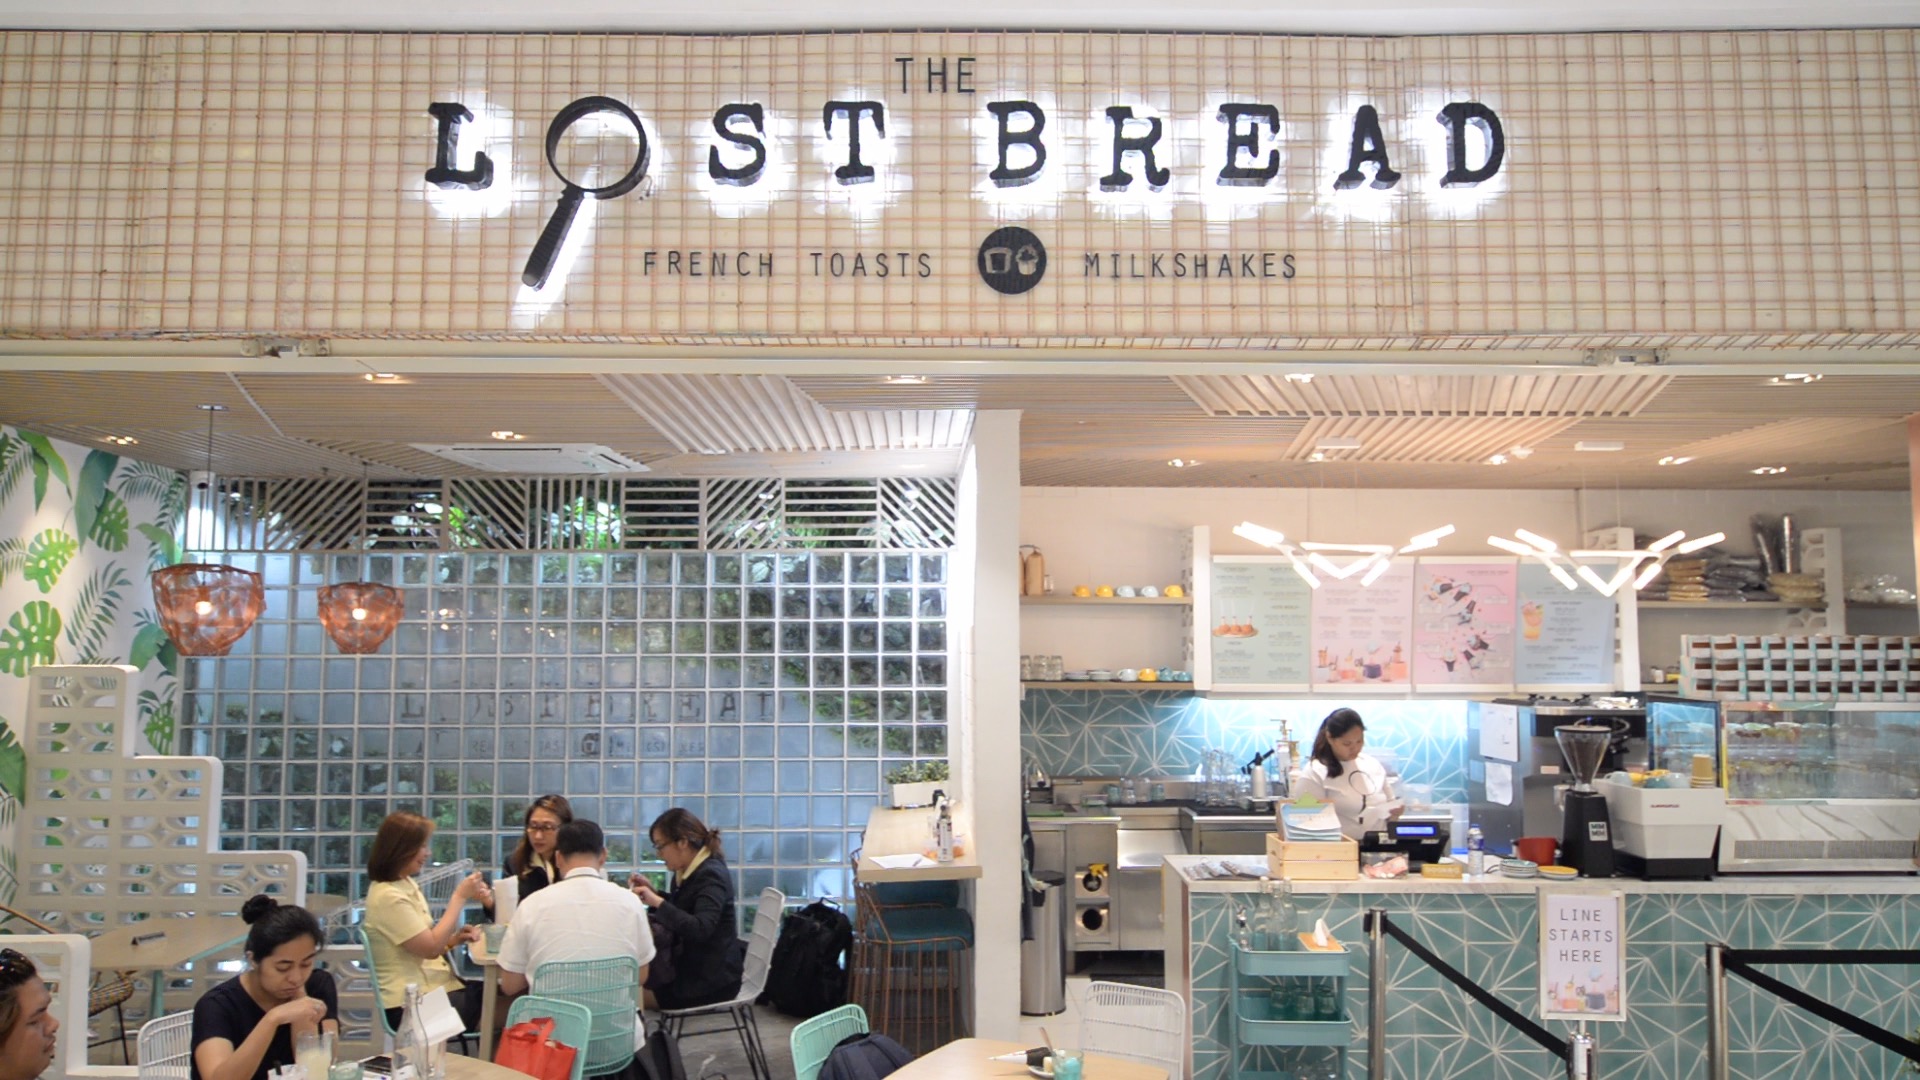 The Lost Bread Now Delivers!